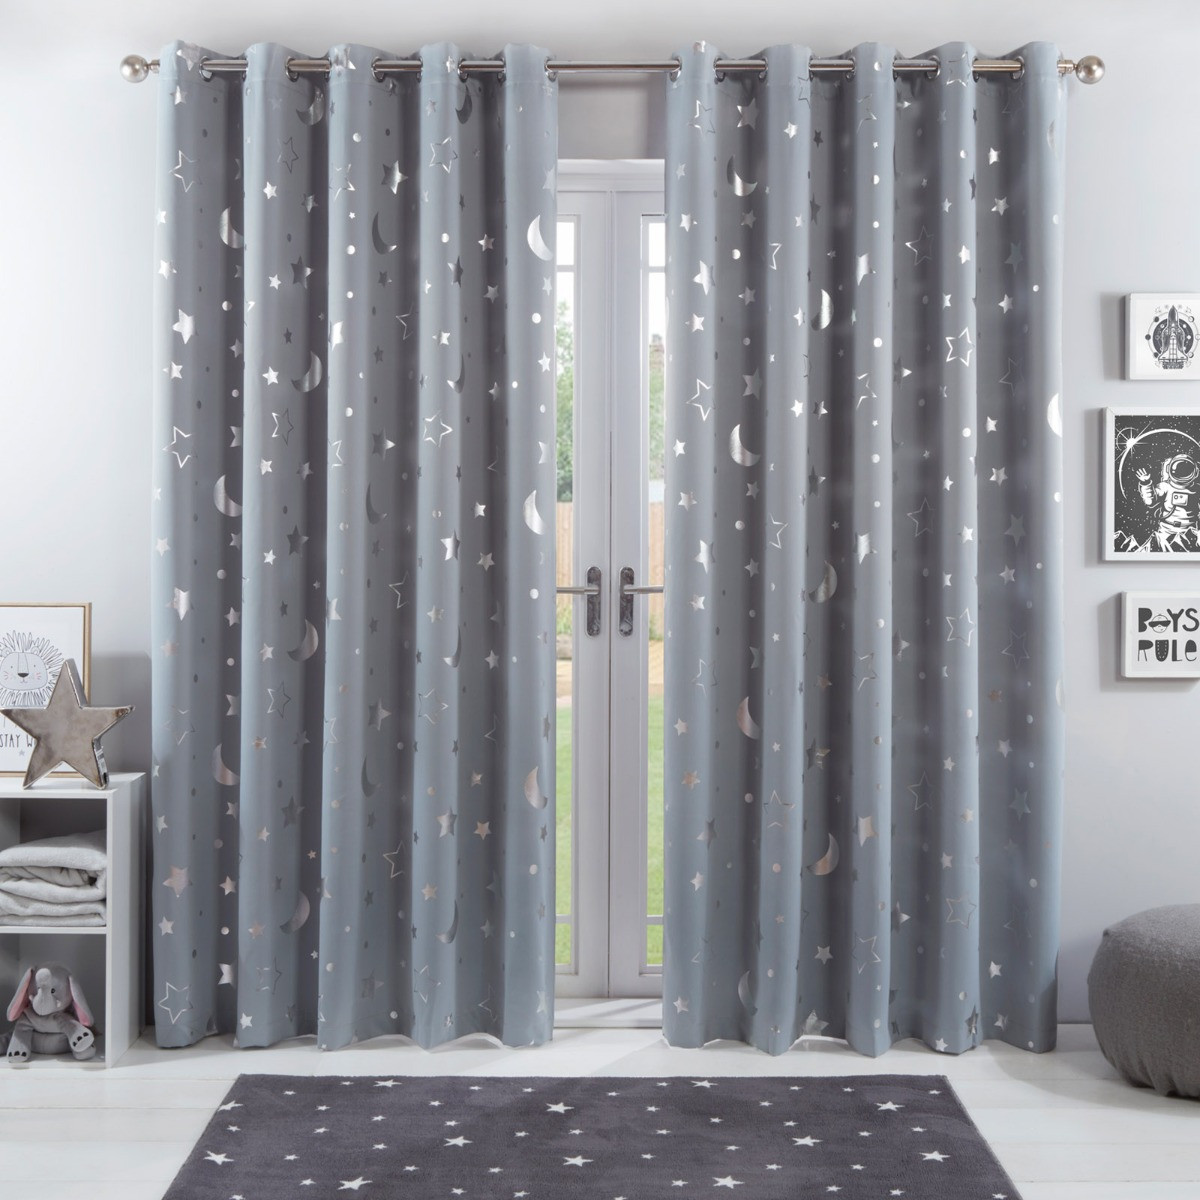 Dreamscene by OHS Star Galaxy Blackout Curtains Grommet Top - Silver Grey>